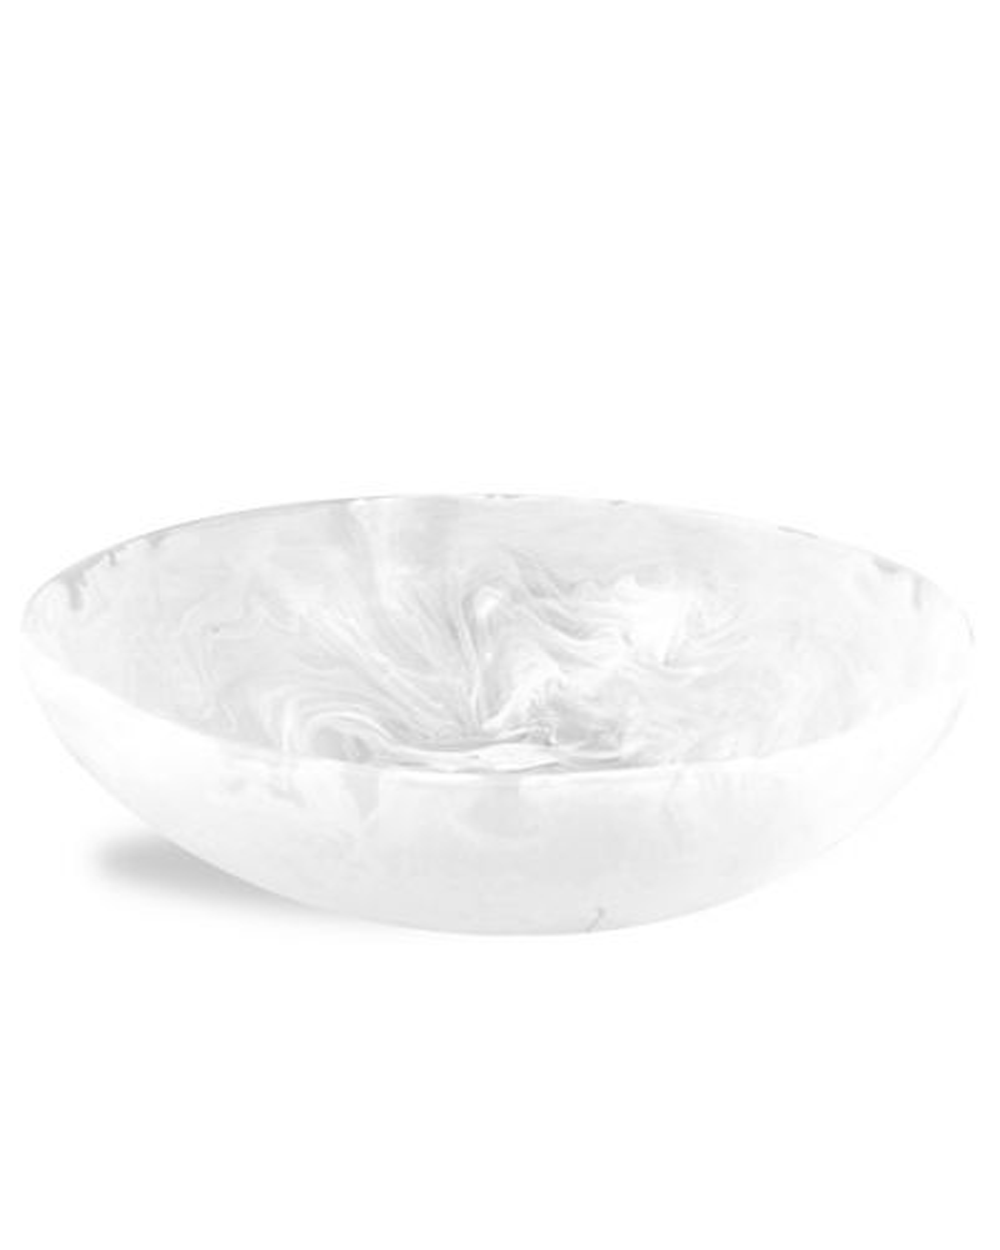 Large Wave Bowl in White Swirl